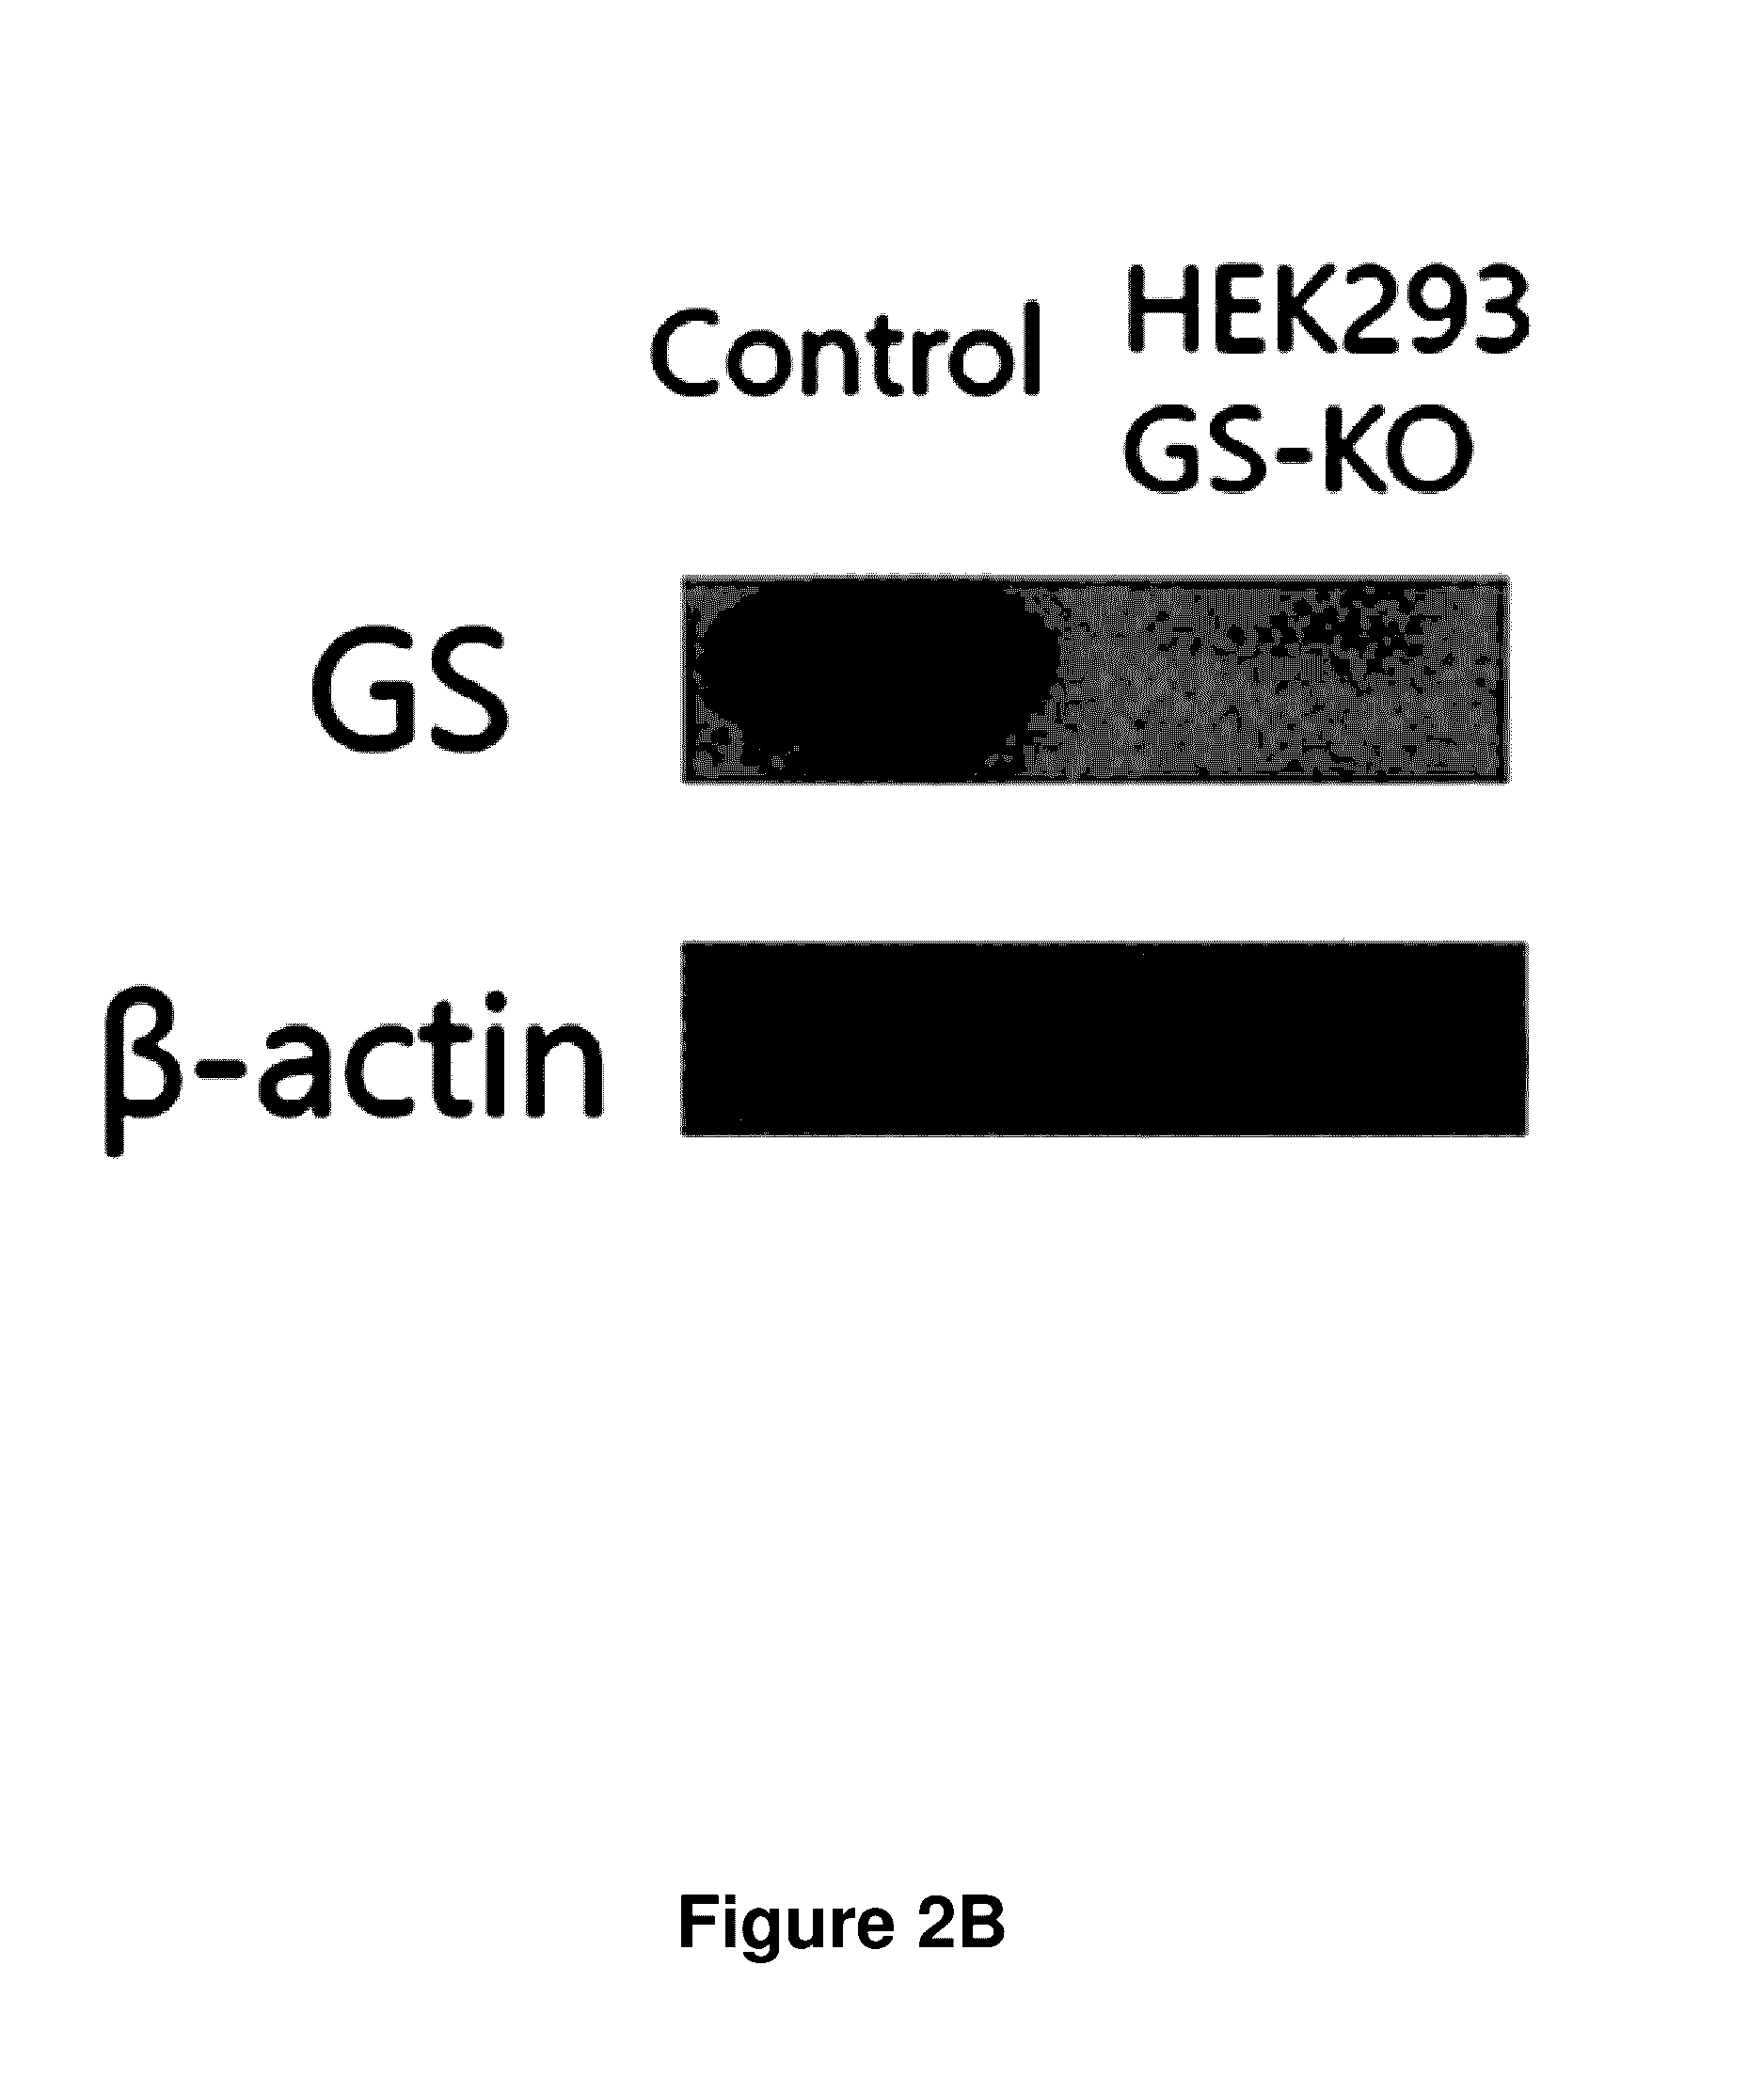 Cell line containing a knockout of the glutamine synthetase (GS) gene and a method of producing target proteins using a GS knockout HEK293 cell line